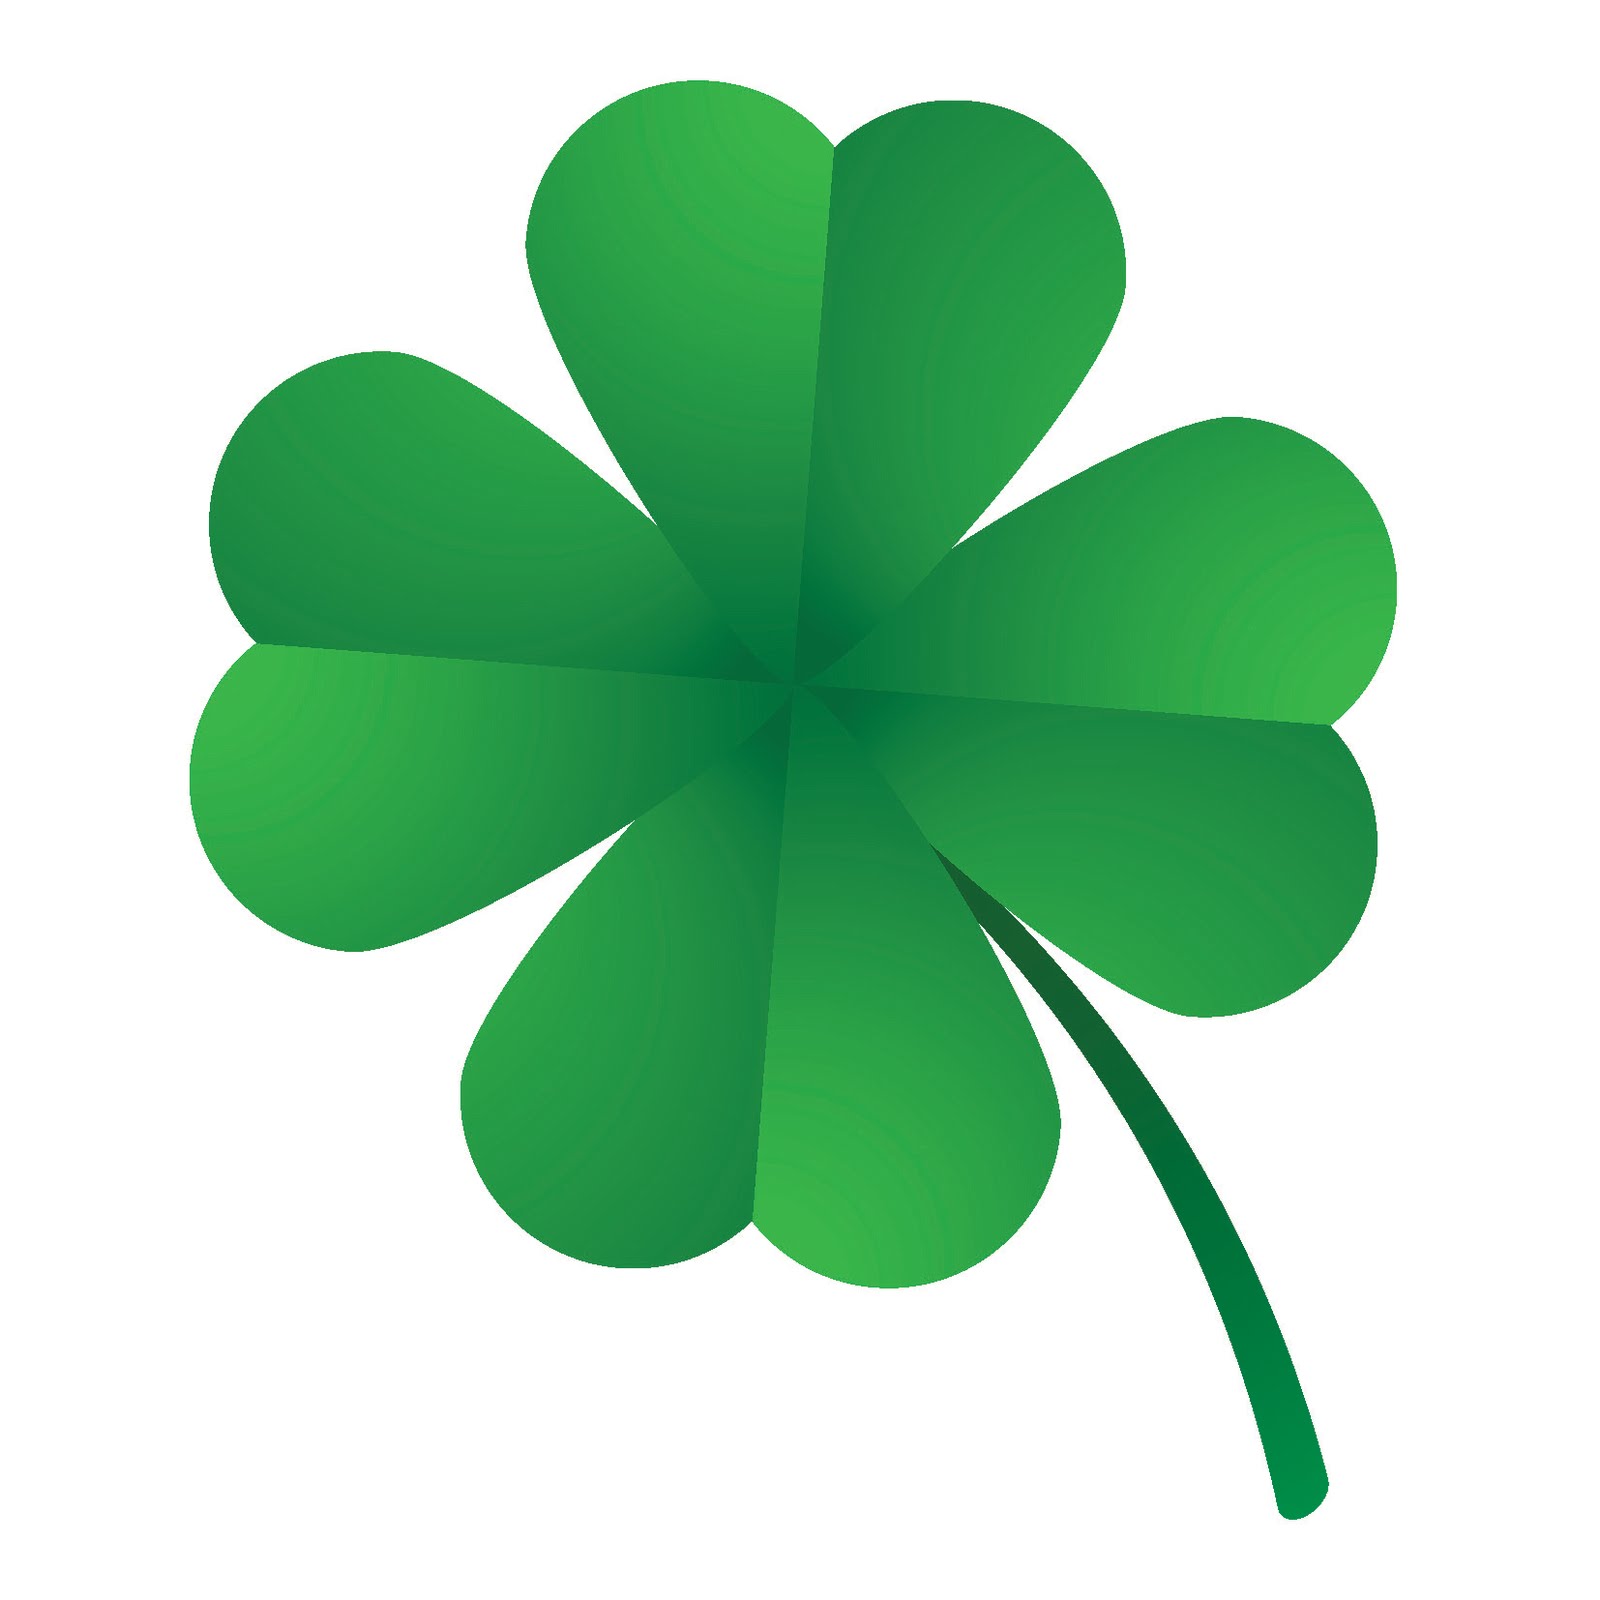 Four Leaf Clover Picture - ClipArt Best